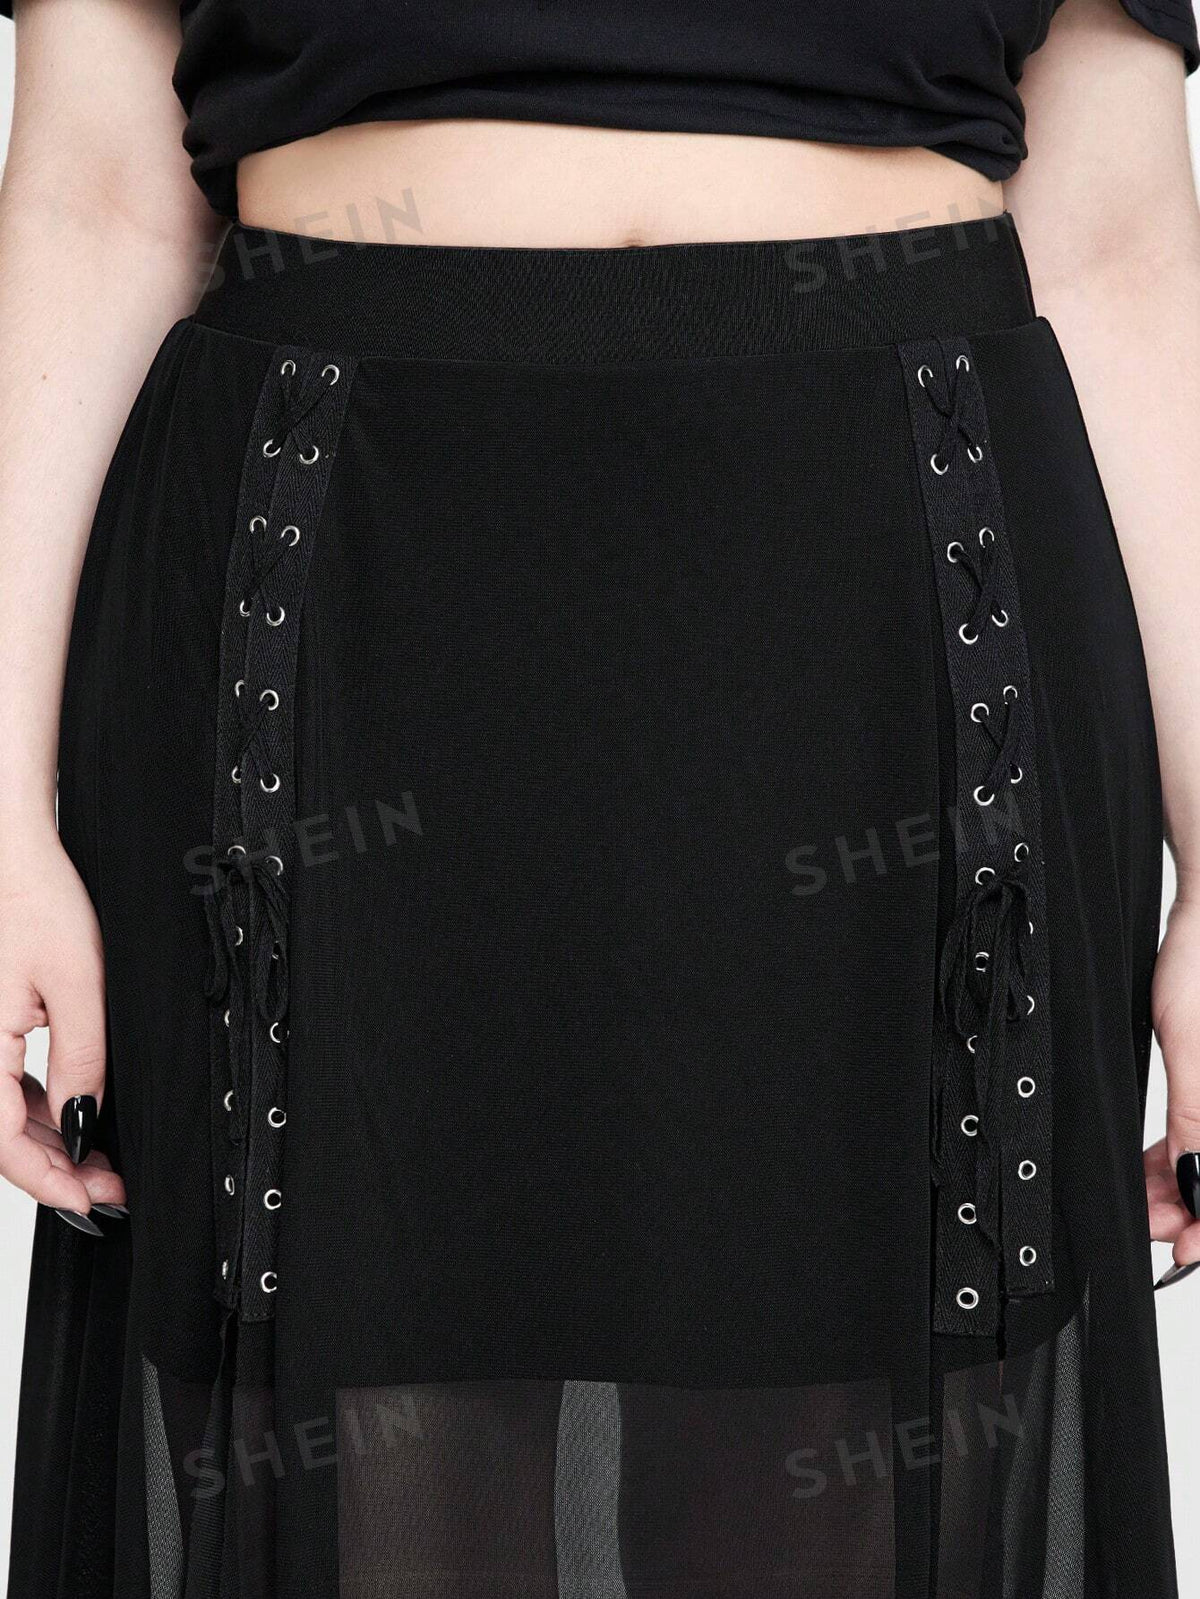 ROMWE Goth Plus Size Gothic Metal-Chain Strap High-Slit Sheer Mesh A-Line Skirt For Women